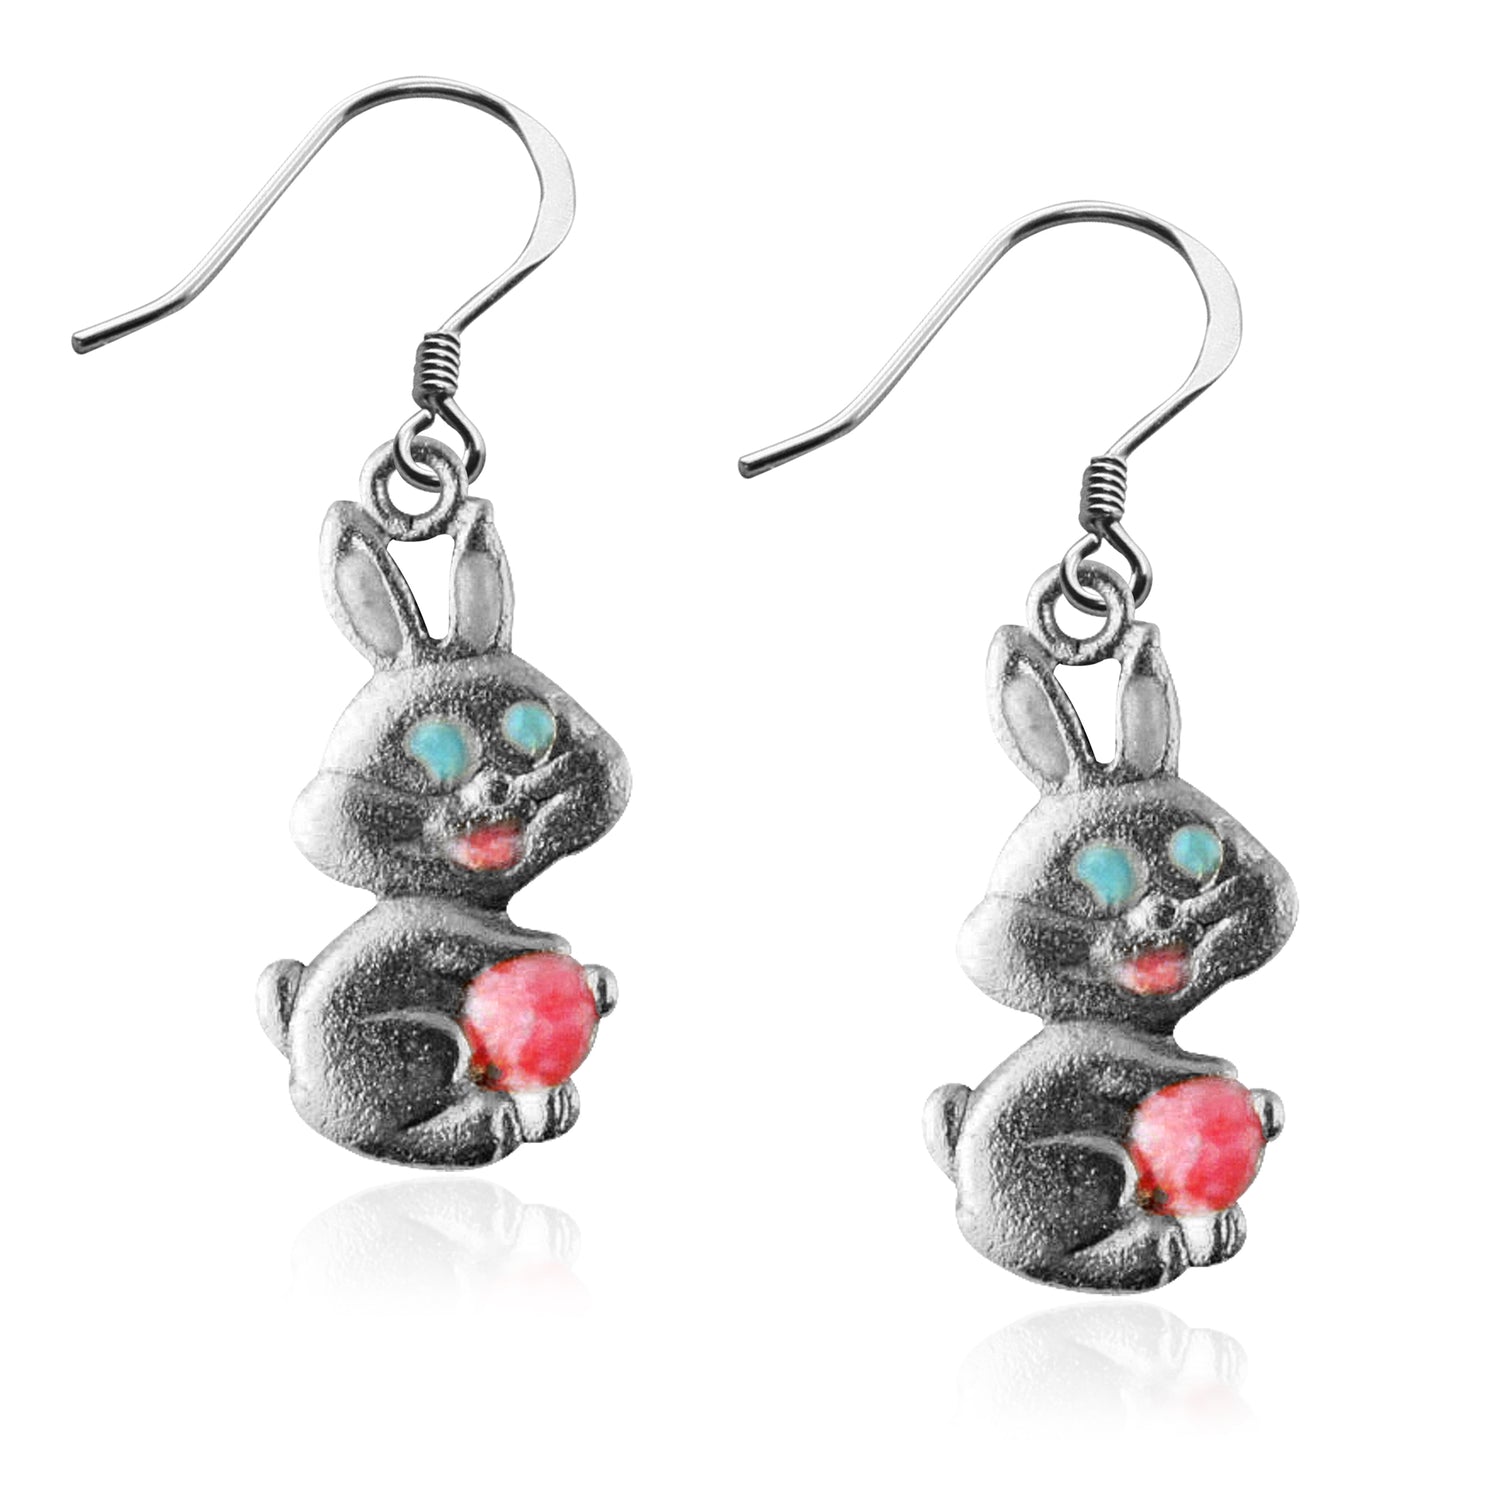 Whimsical Gifts | Easter Bunny Charm Earrings in Silver Finish | Holiday & Seasonal Themed | Easter | Jewelry